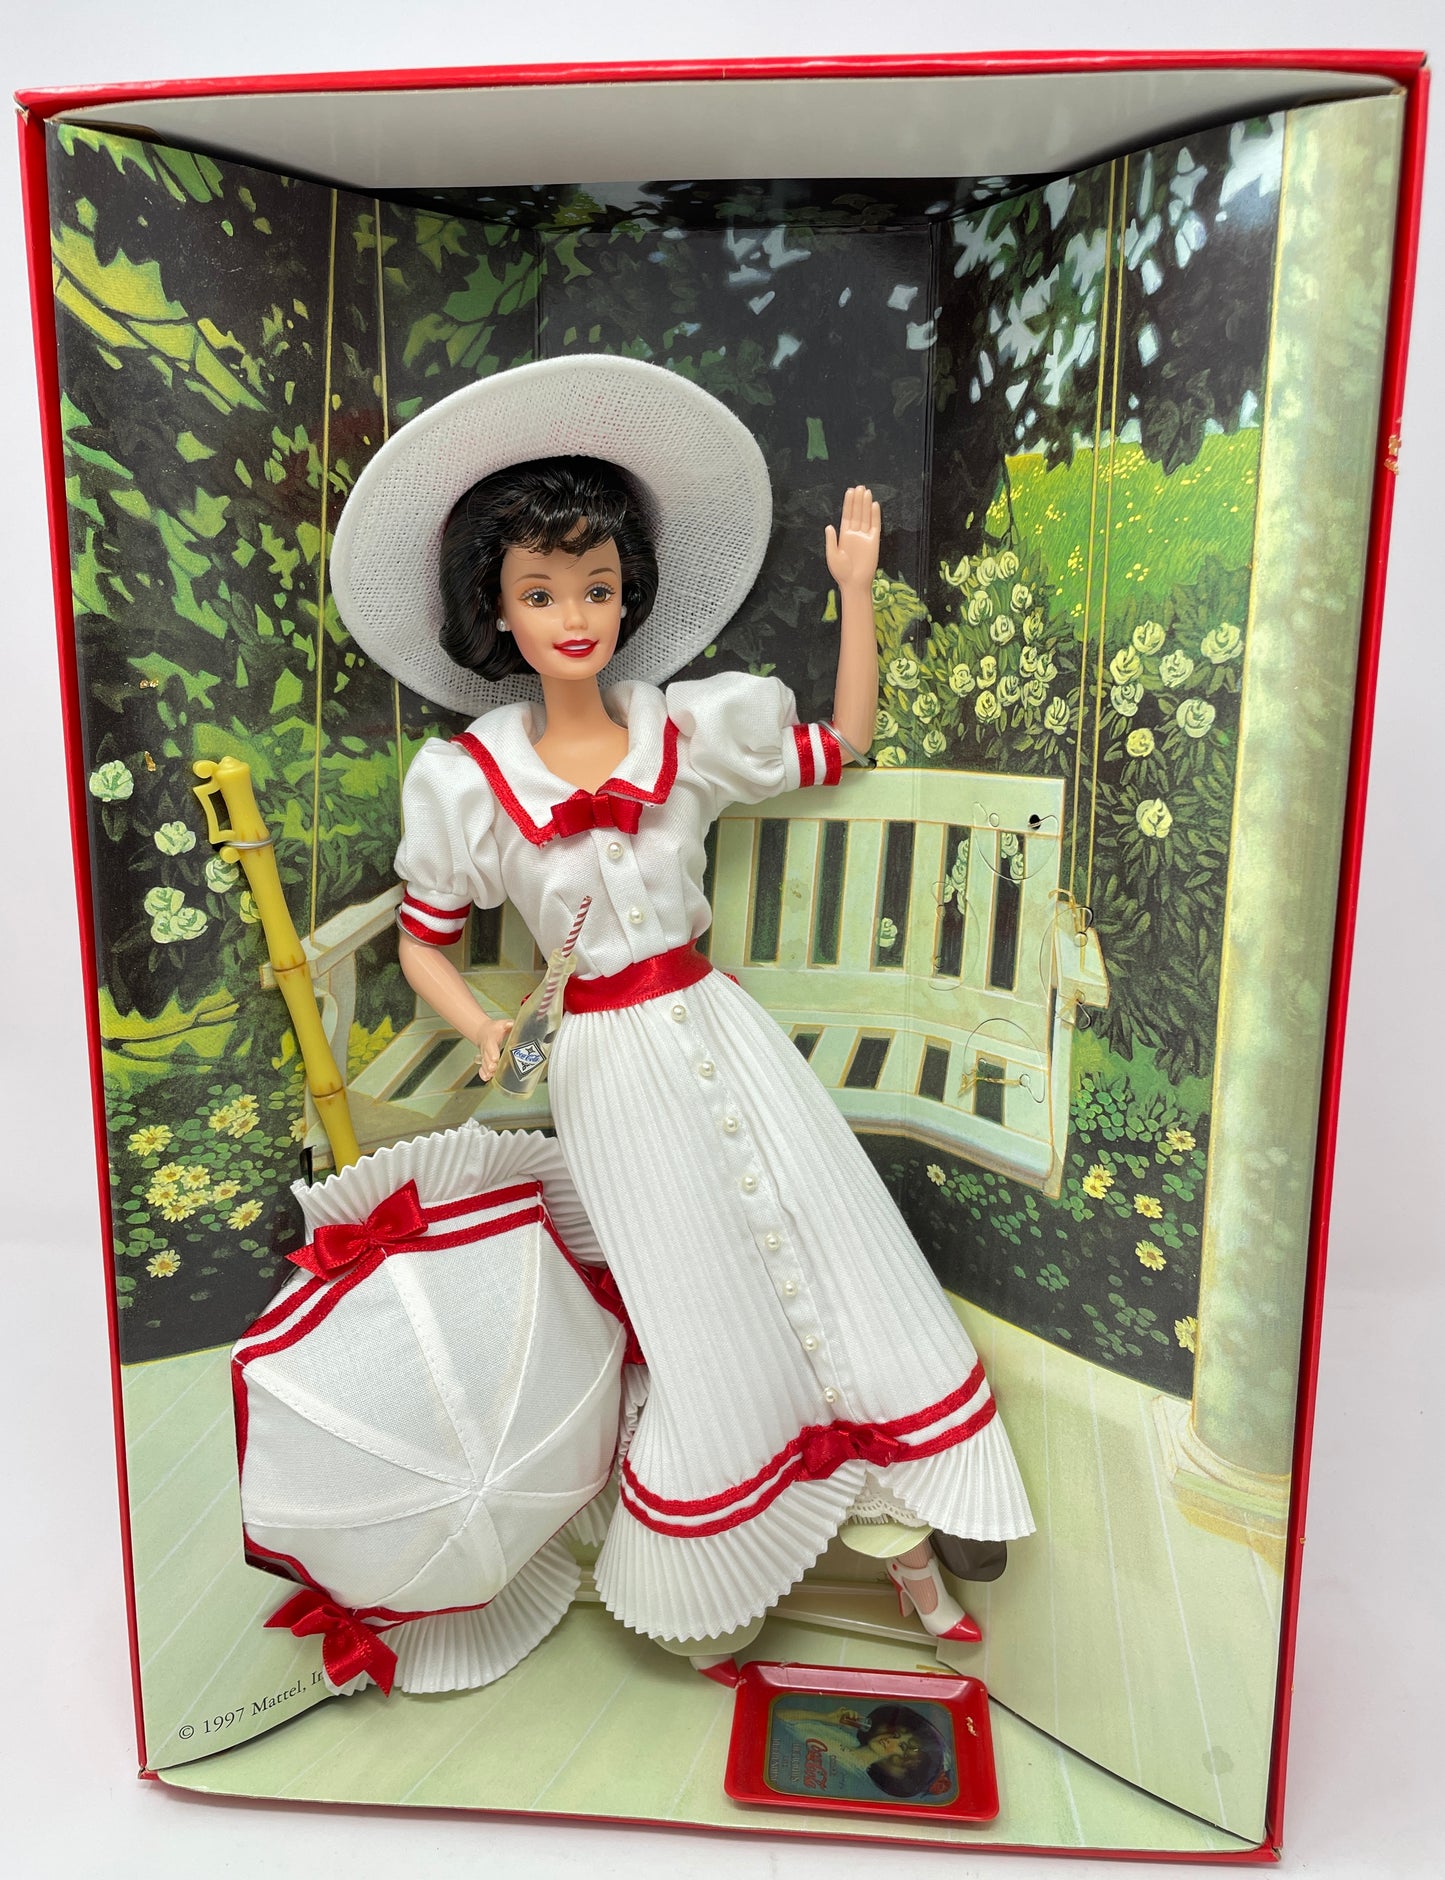 SUMMER DAYDREAMS BARBIE - COCA-COLA FASHION CLASSIC SERIES - #19739 - COLLECTOR EDITION - THIRD IN A SERIES